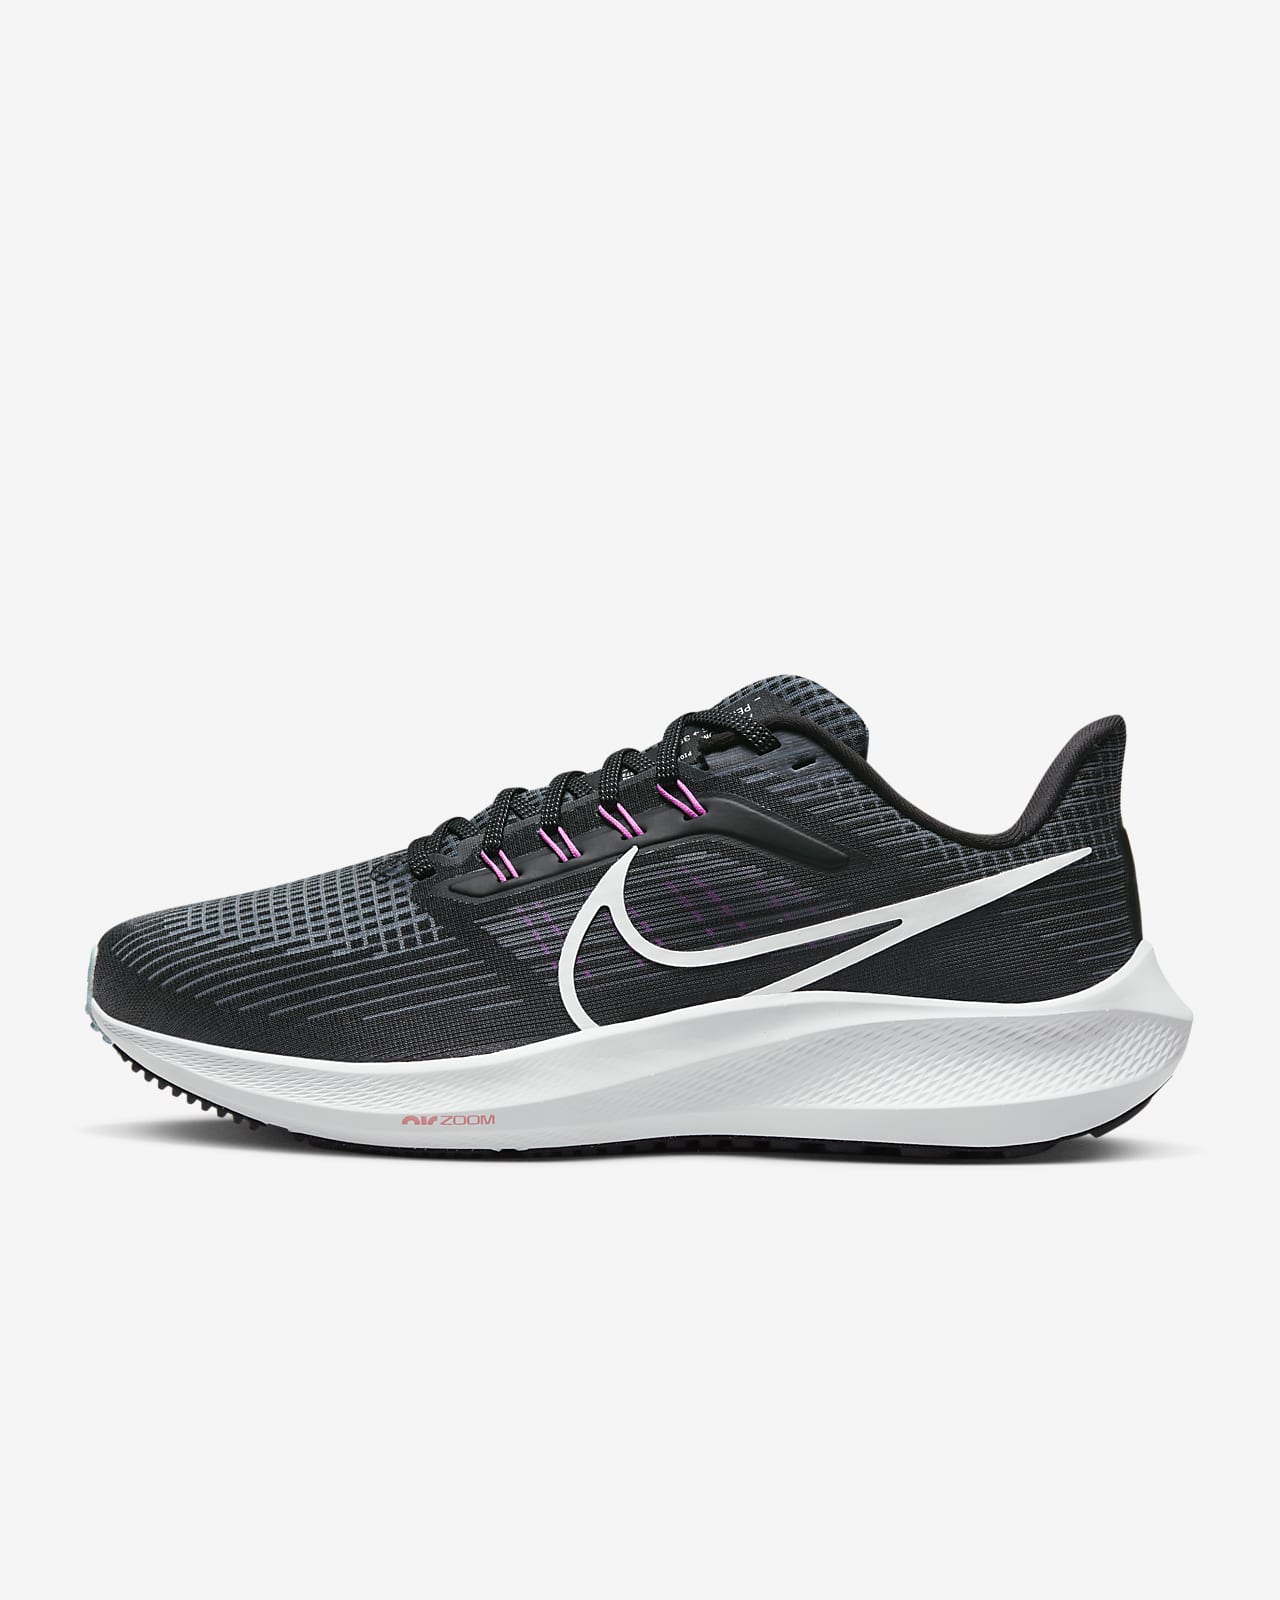 nike running shoes with wide toe box